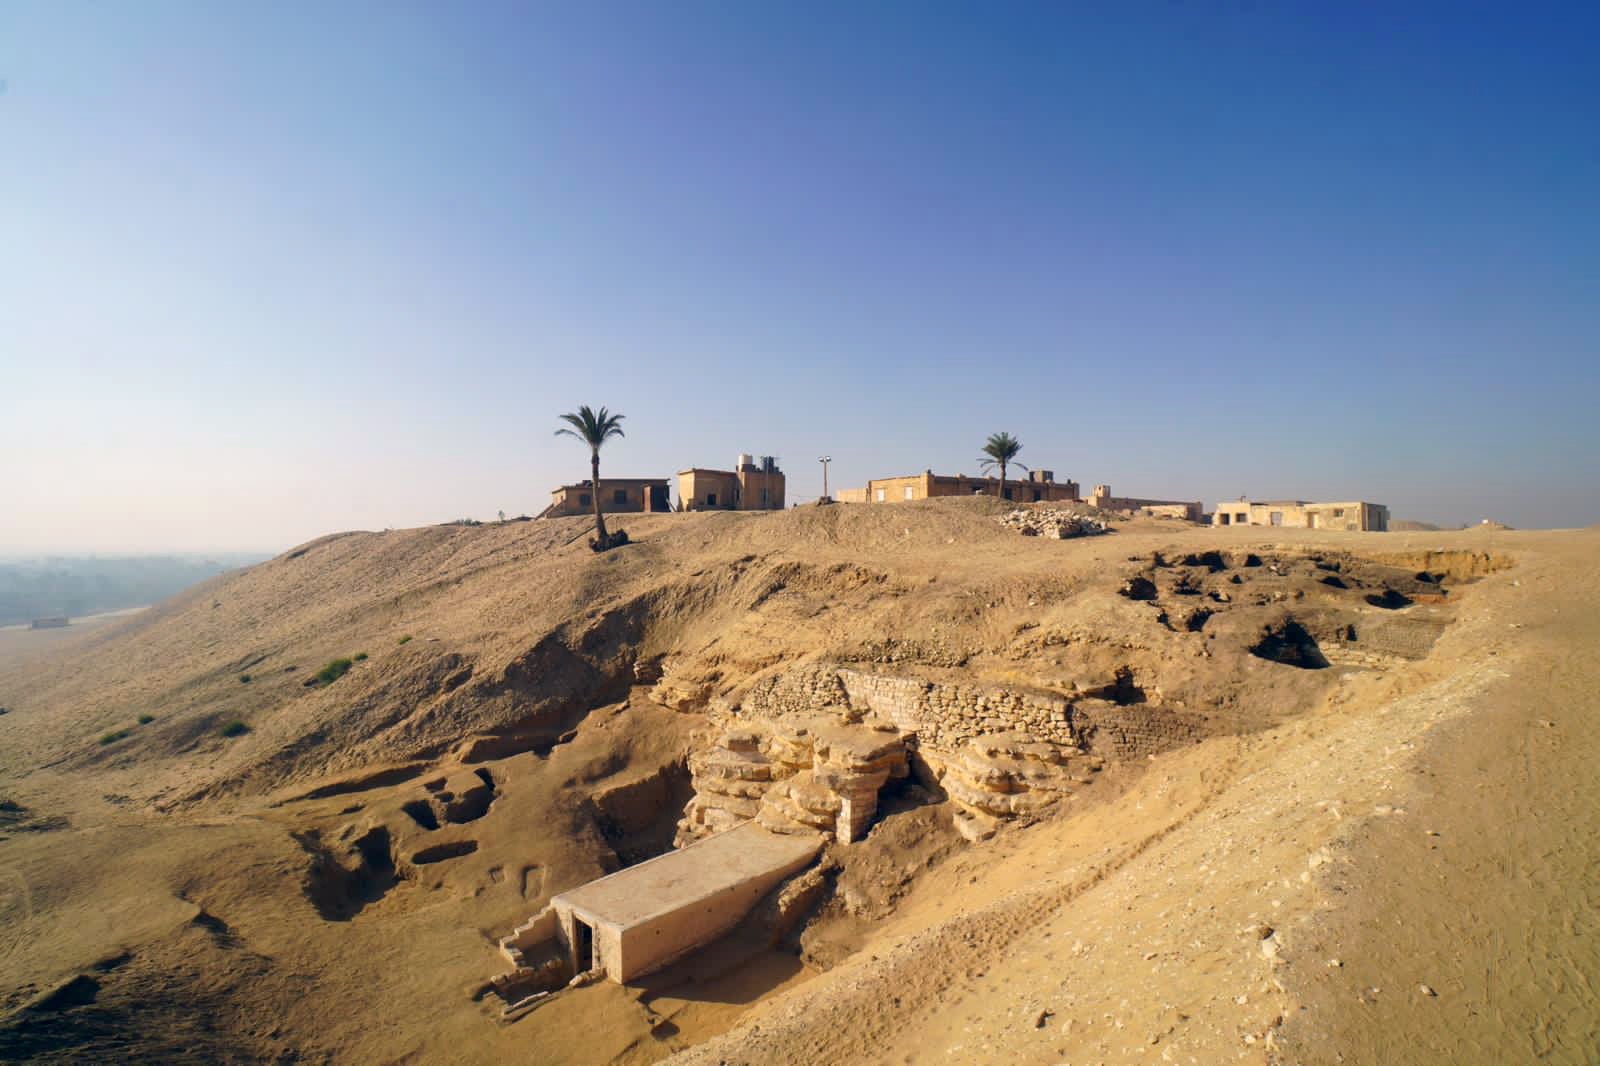 Egyptian-Japanese archaeological team makes new finds in Saqqara